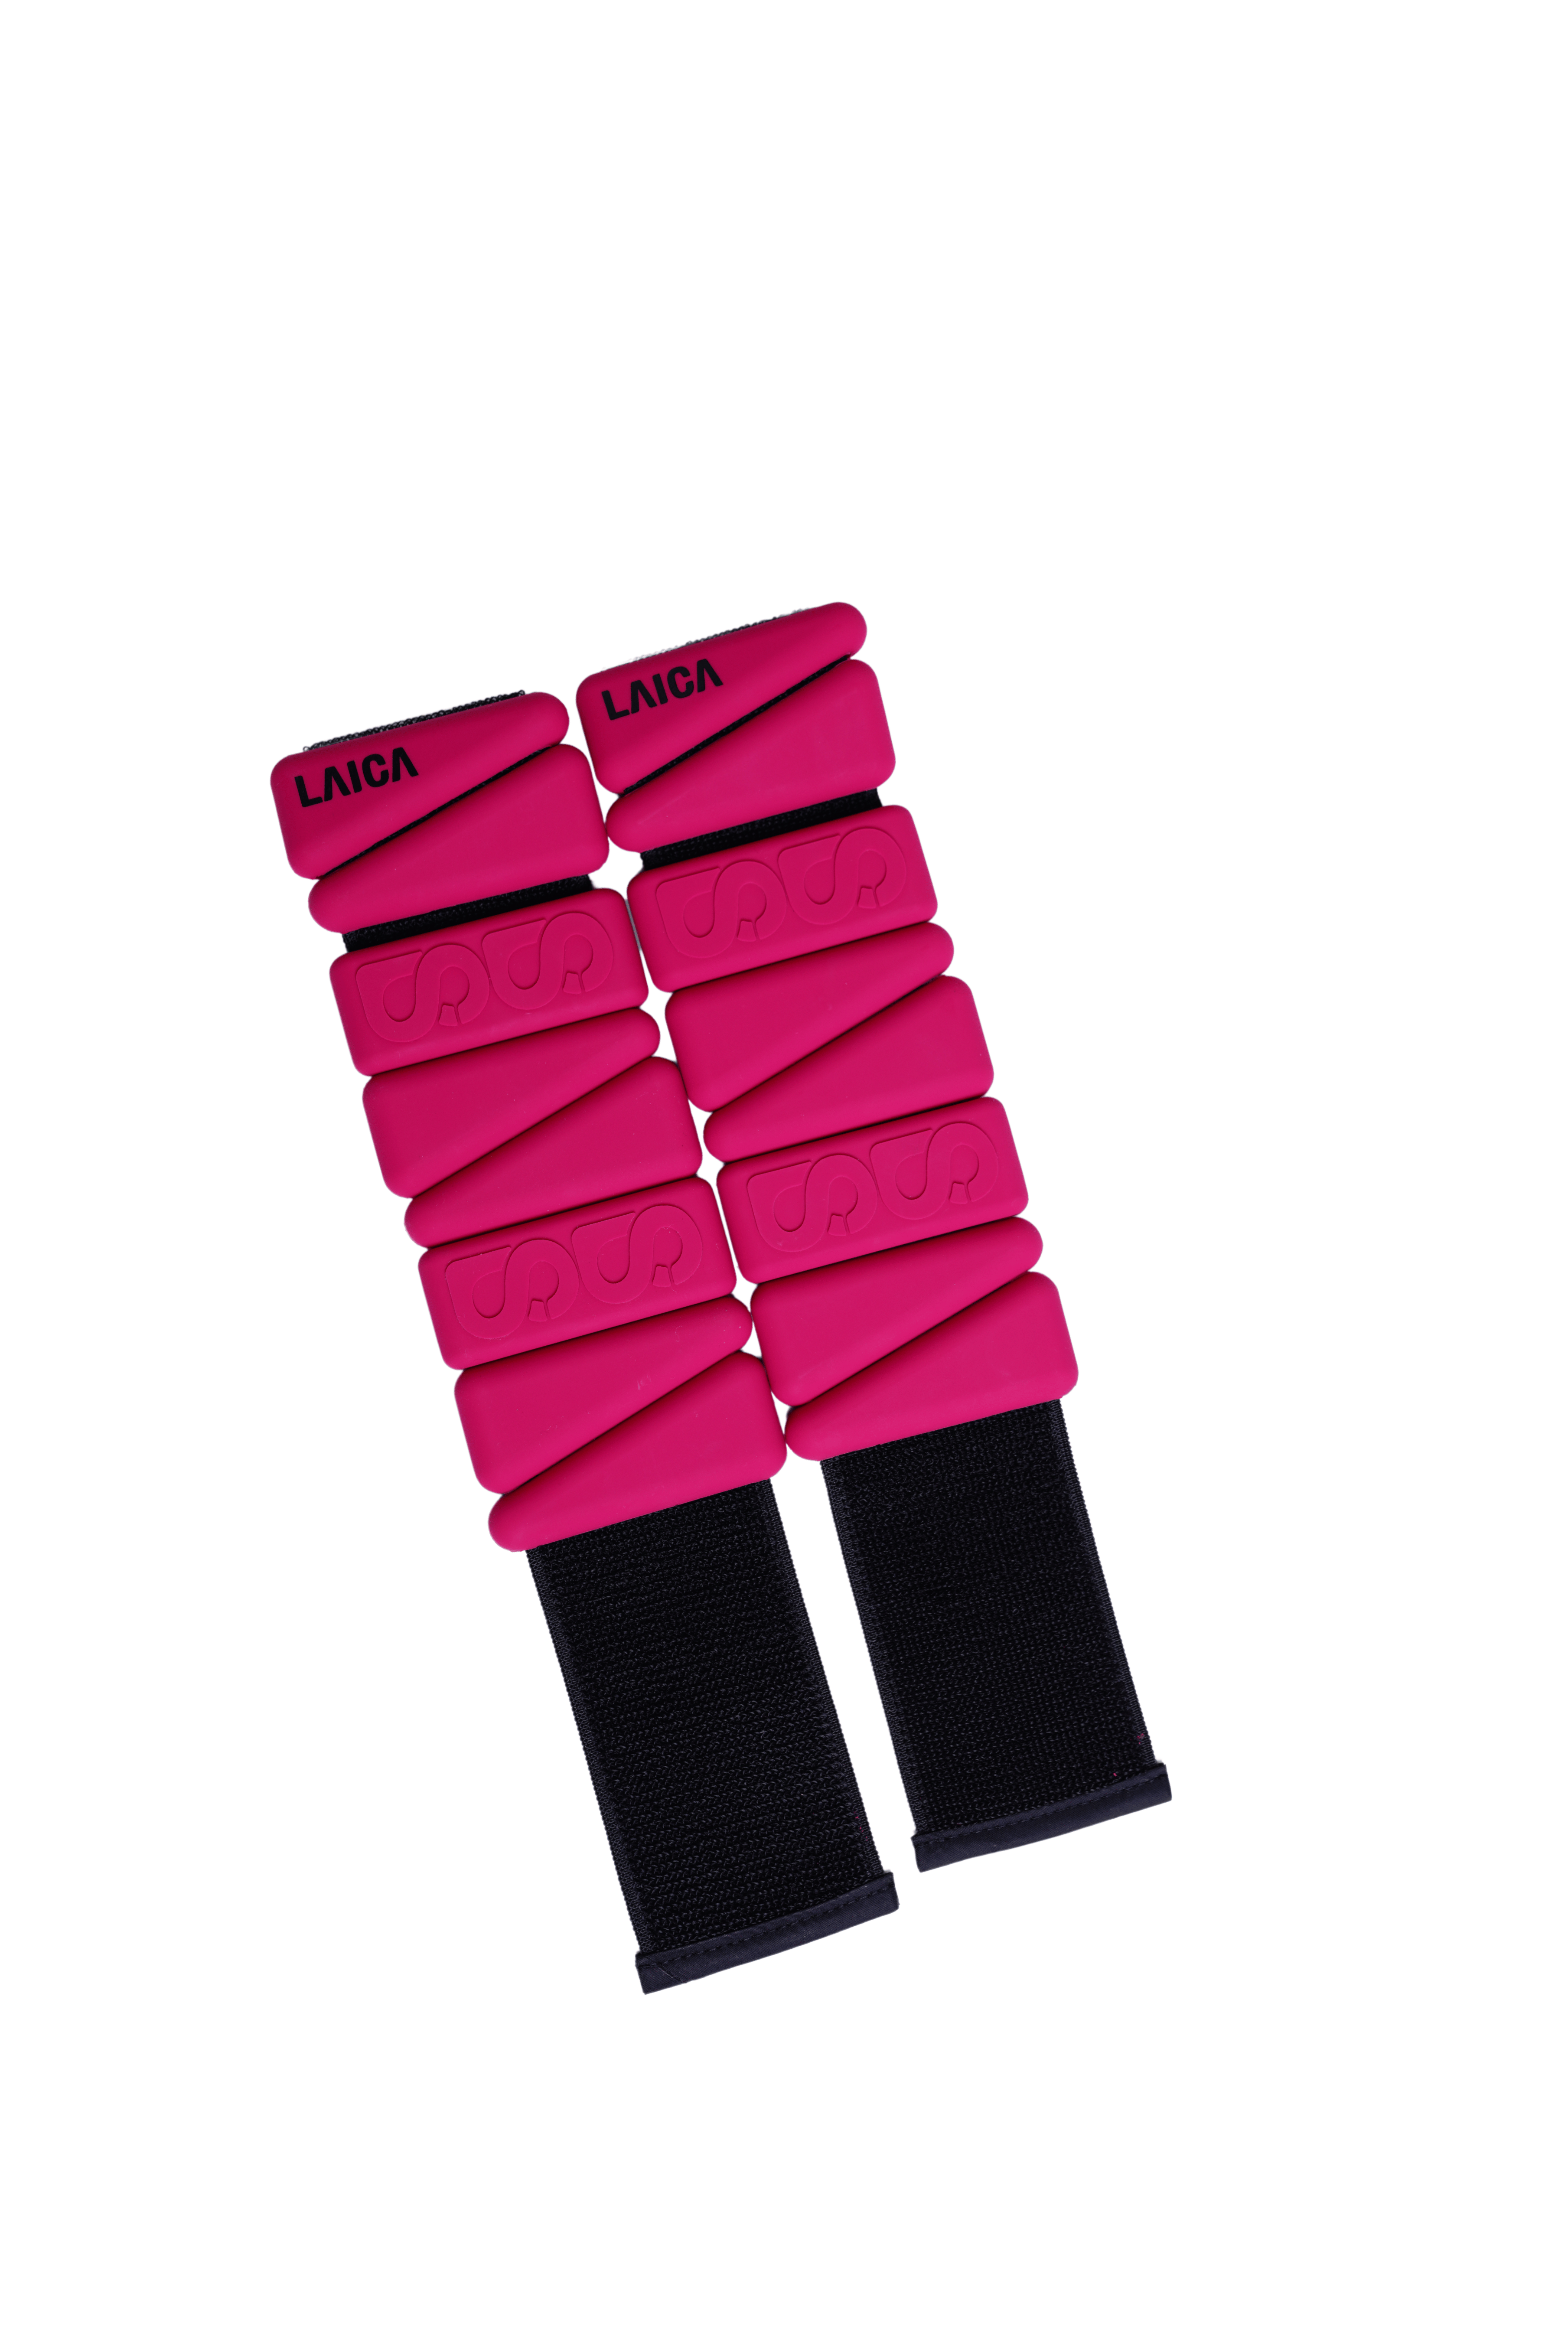 LAICA x Buttonscarves Athleisure Weighted Bangles - Magenta